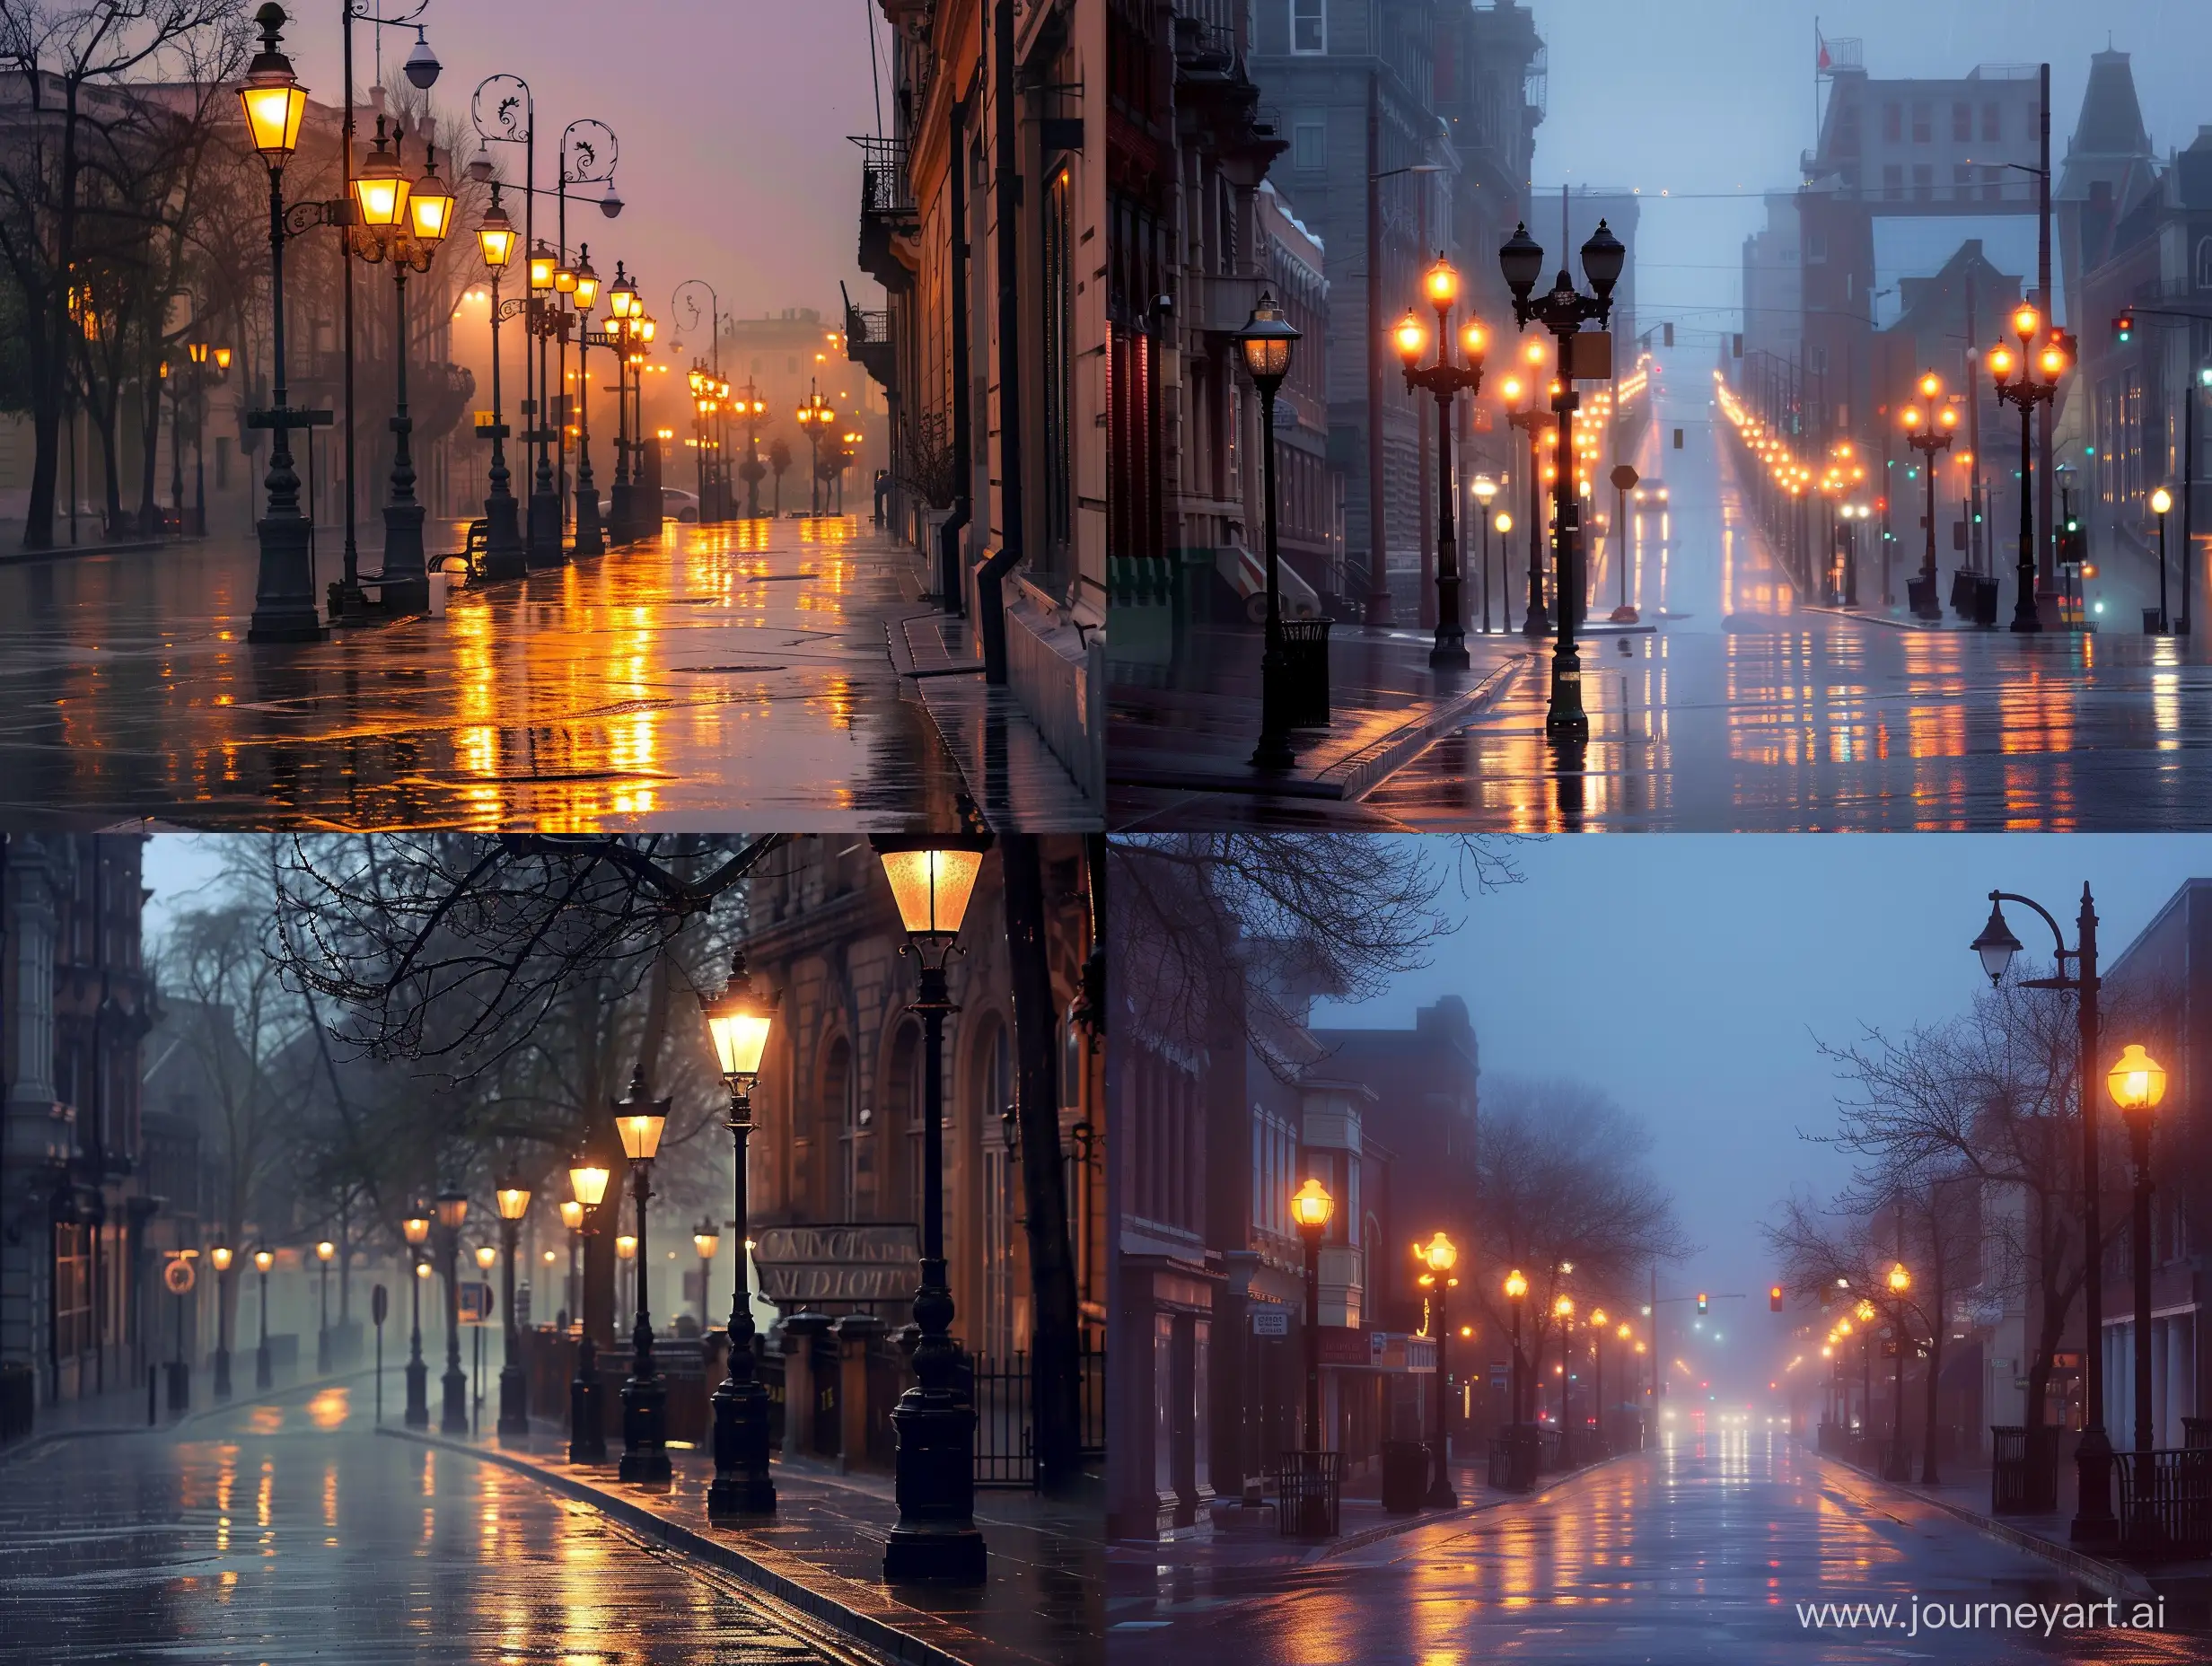 Rainy-Morning-in-a-Bustling-Town-Serene-Street-Scene-with-Glowing-Lamps